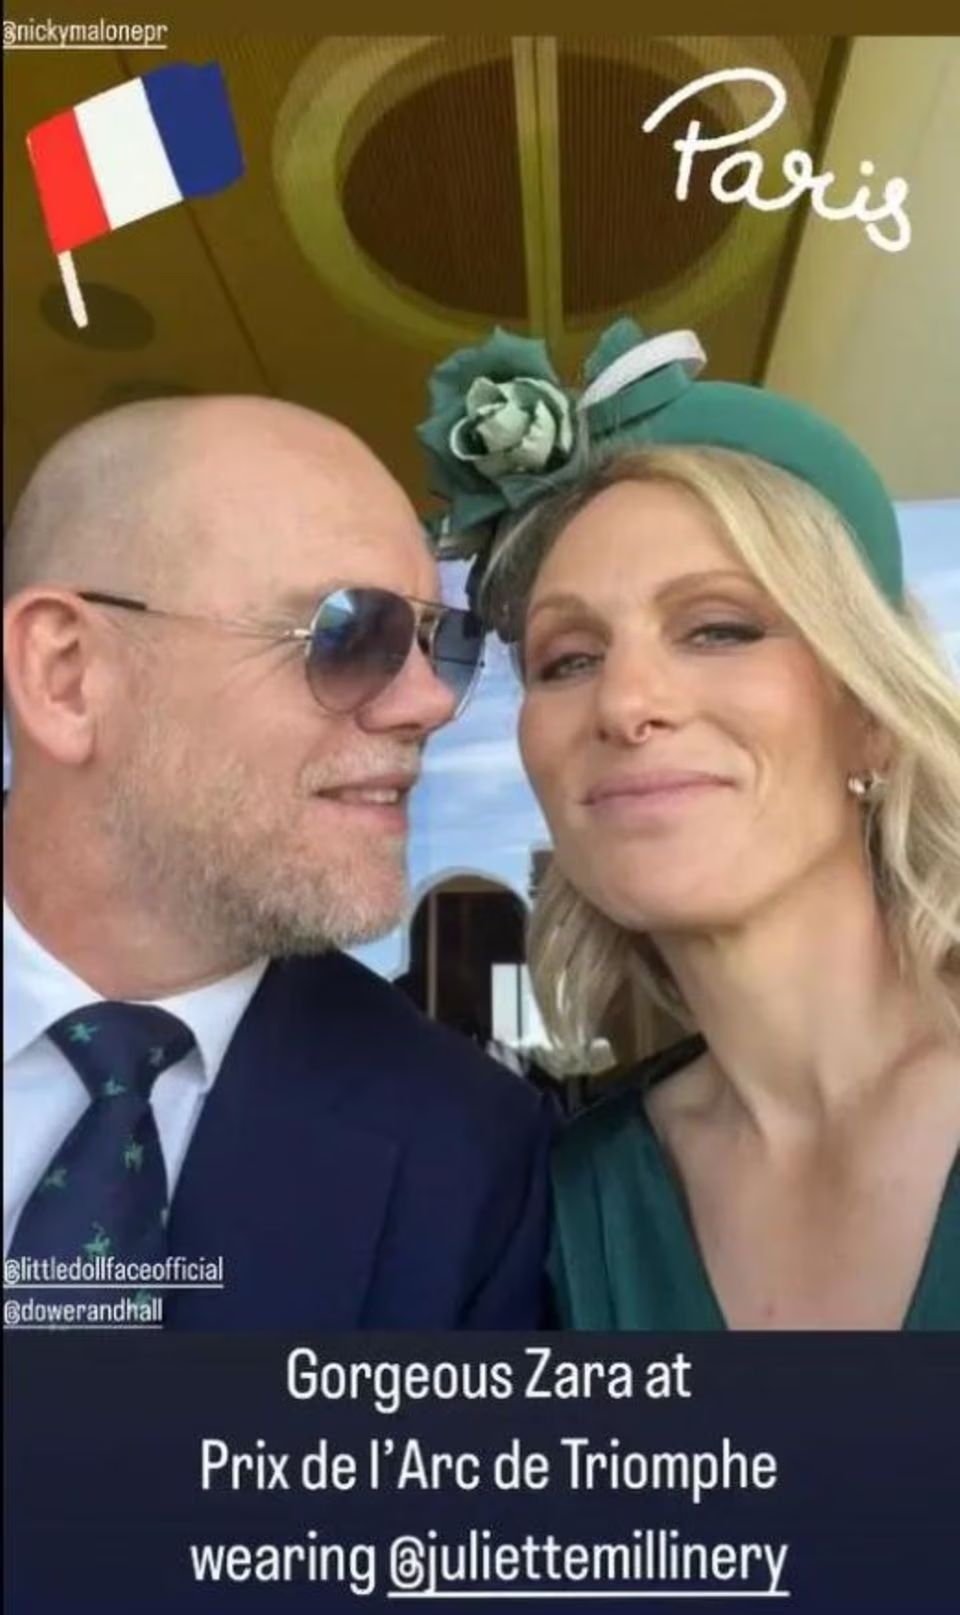 Mike and Zara Tindall in Paris